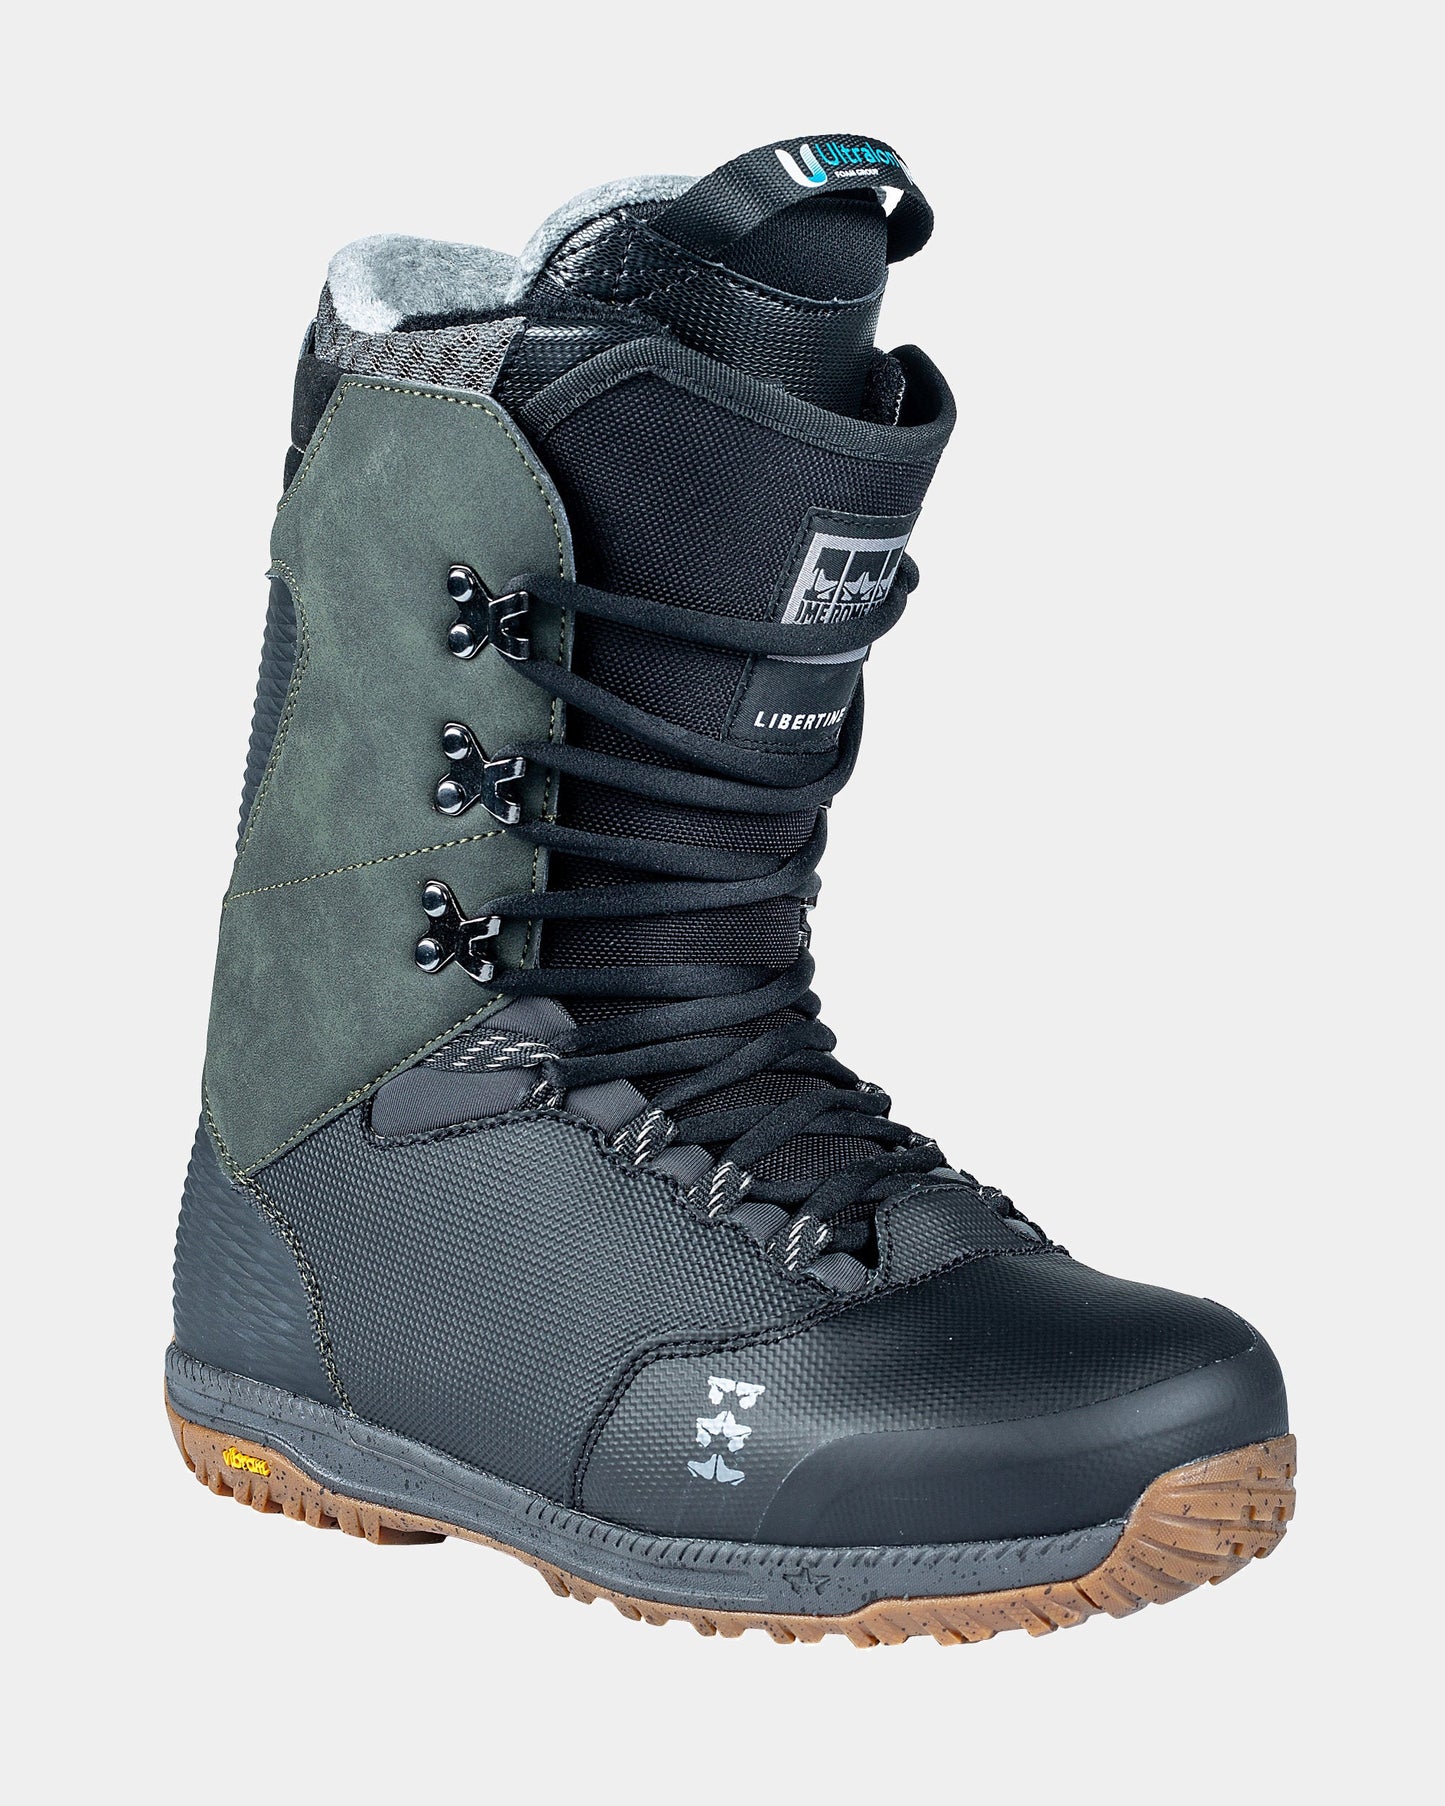 rome libertine snowboard boots 2023-2024 rome snowboard boots product image